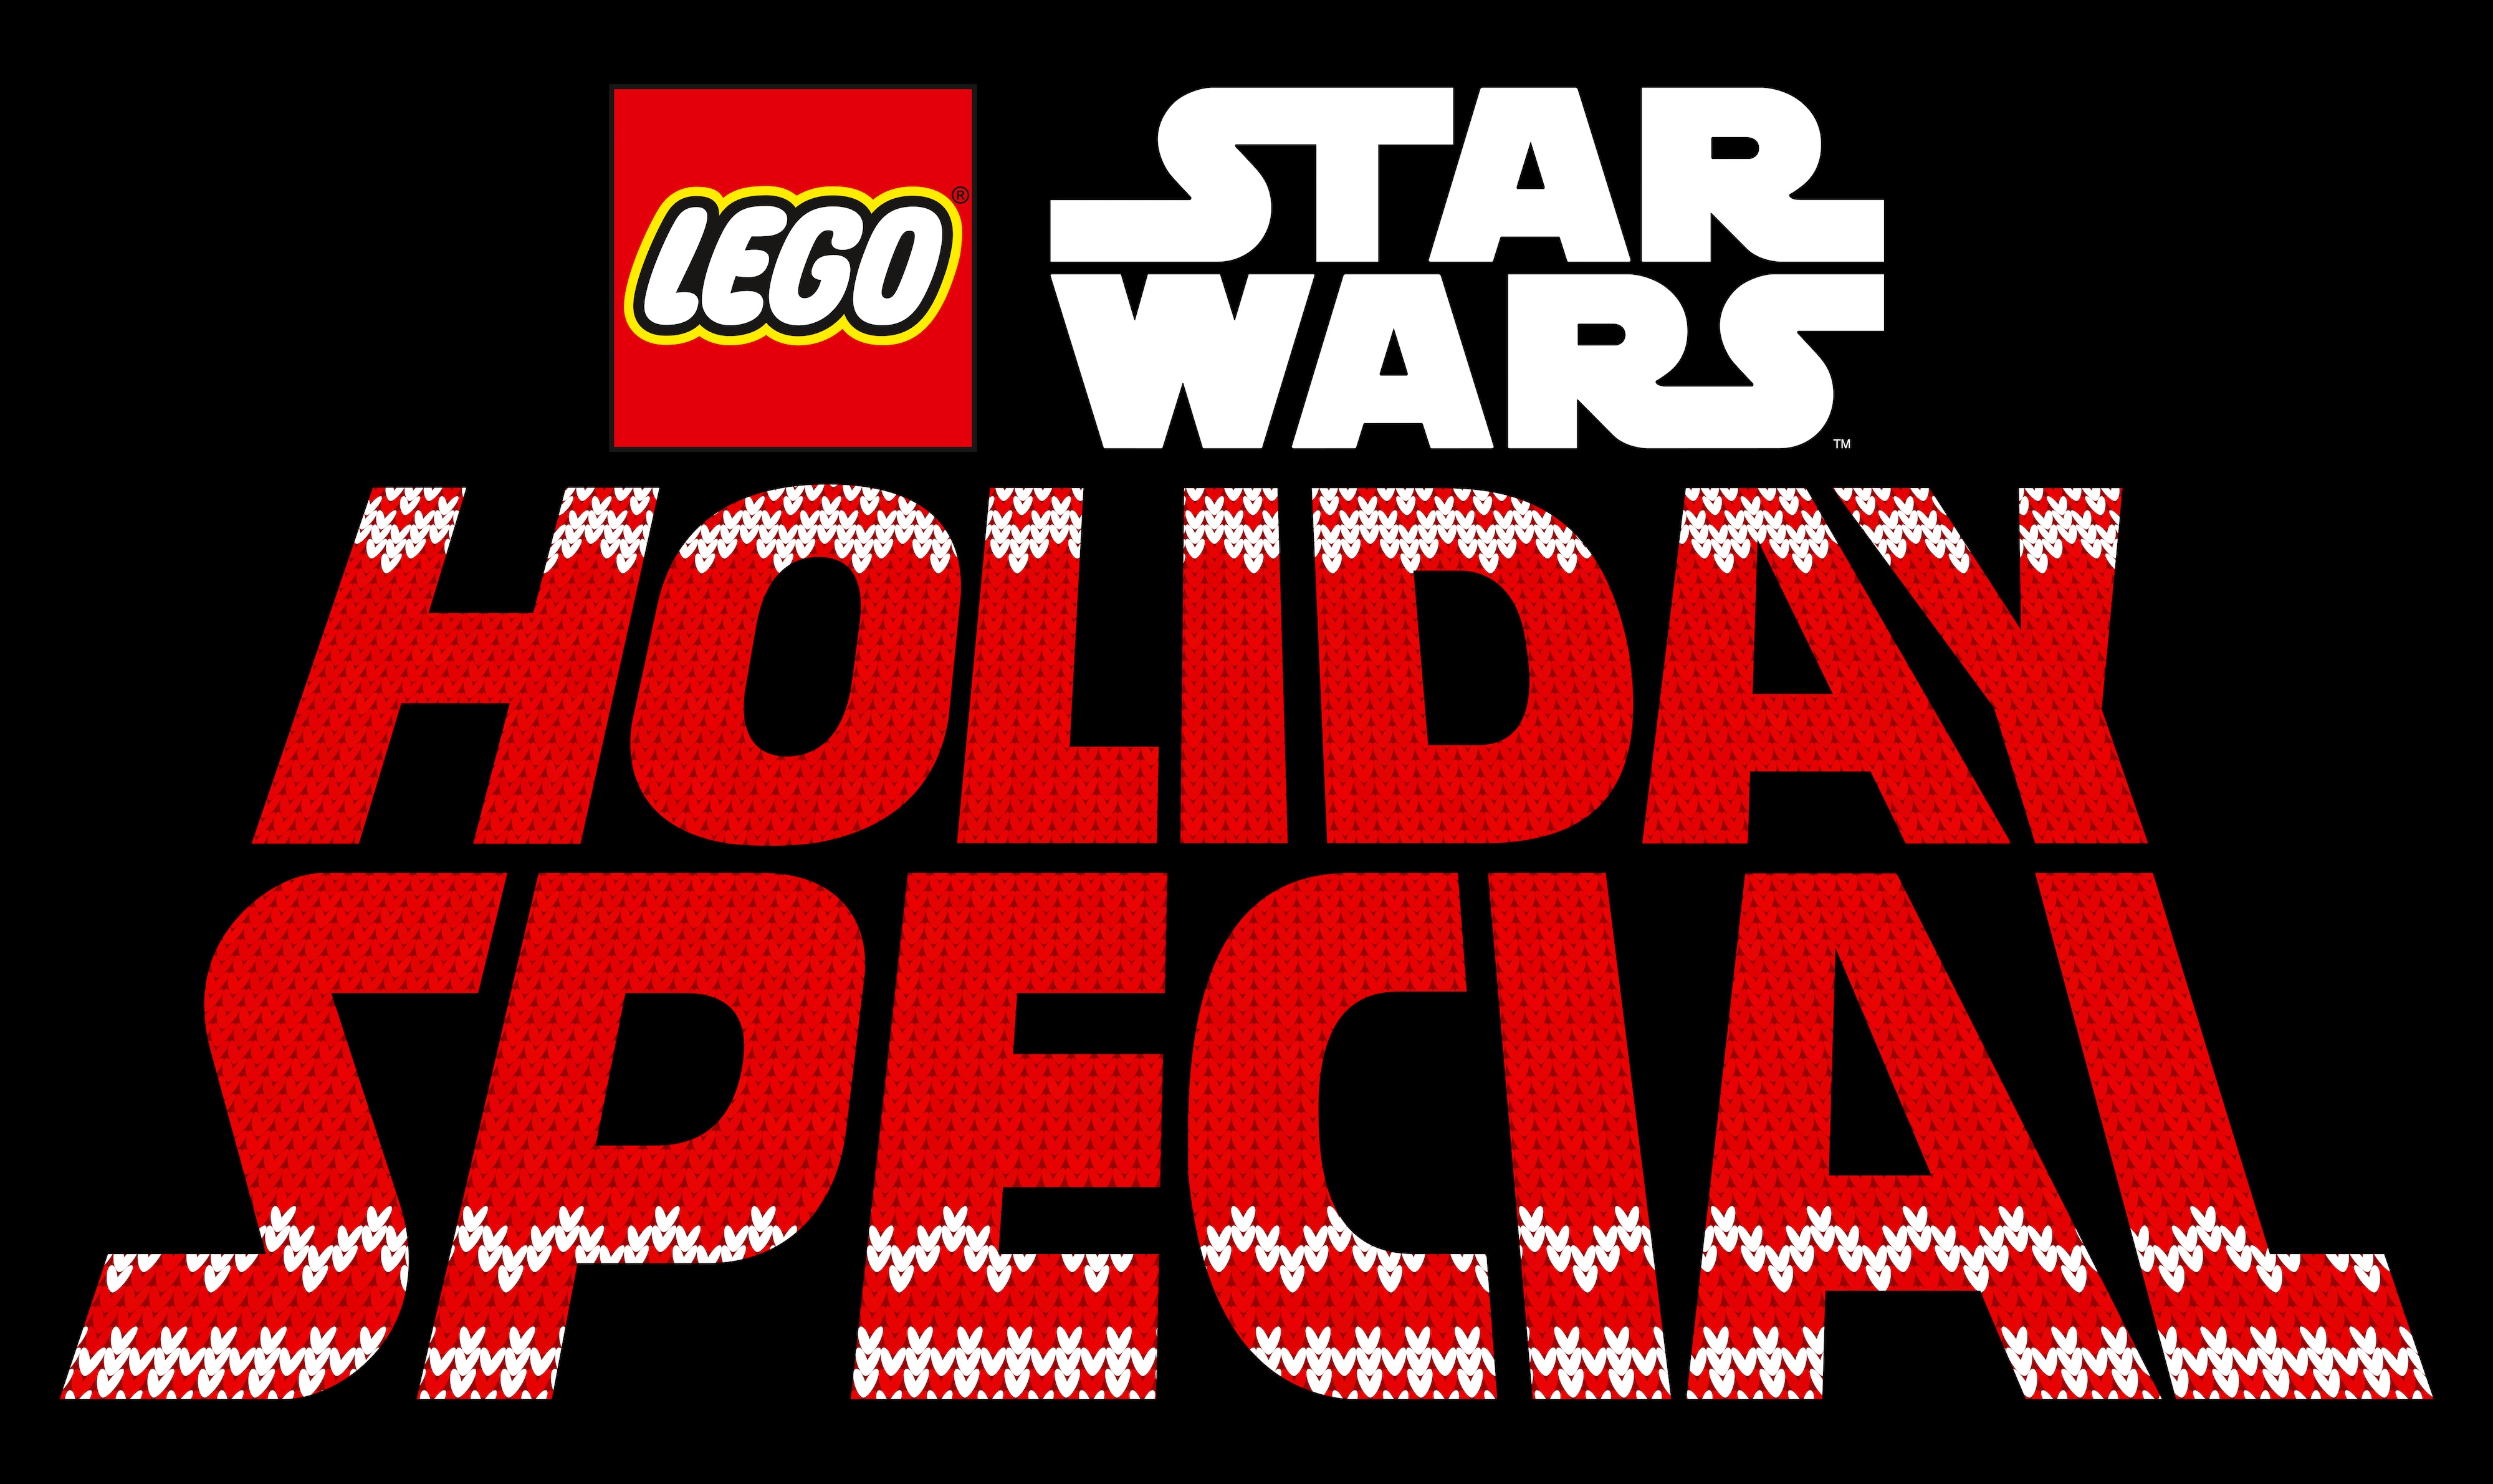 Disney+ Will Premiere “The LEGO Star Wars Holiday Special” on November 17